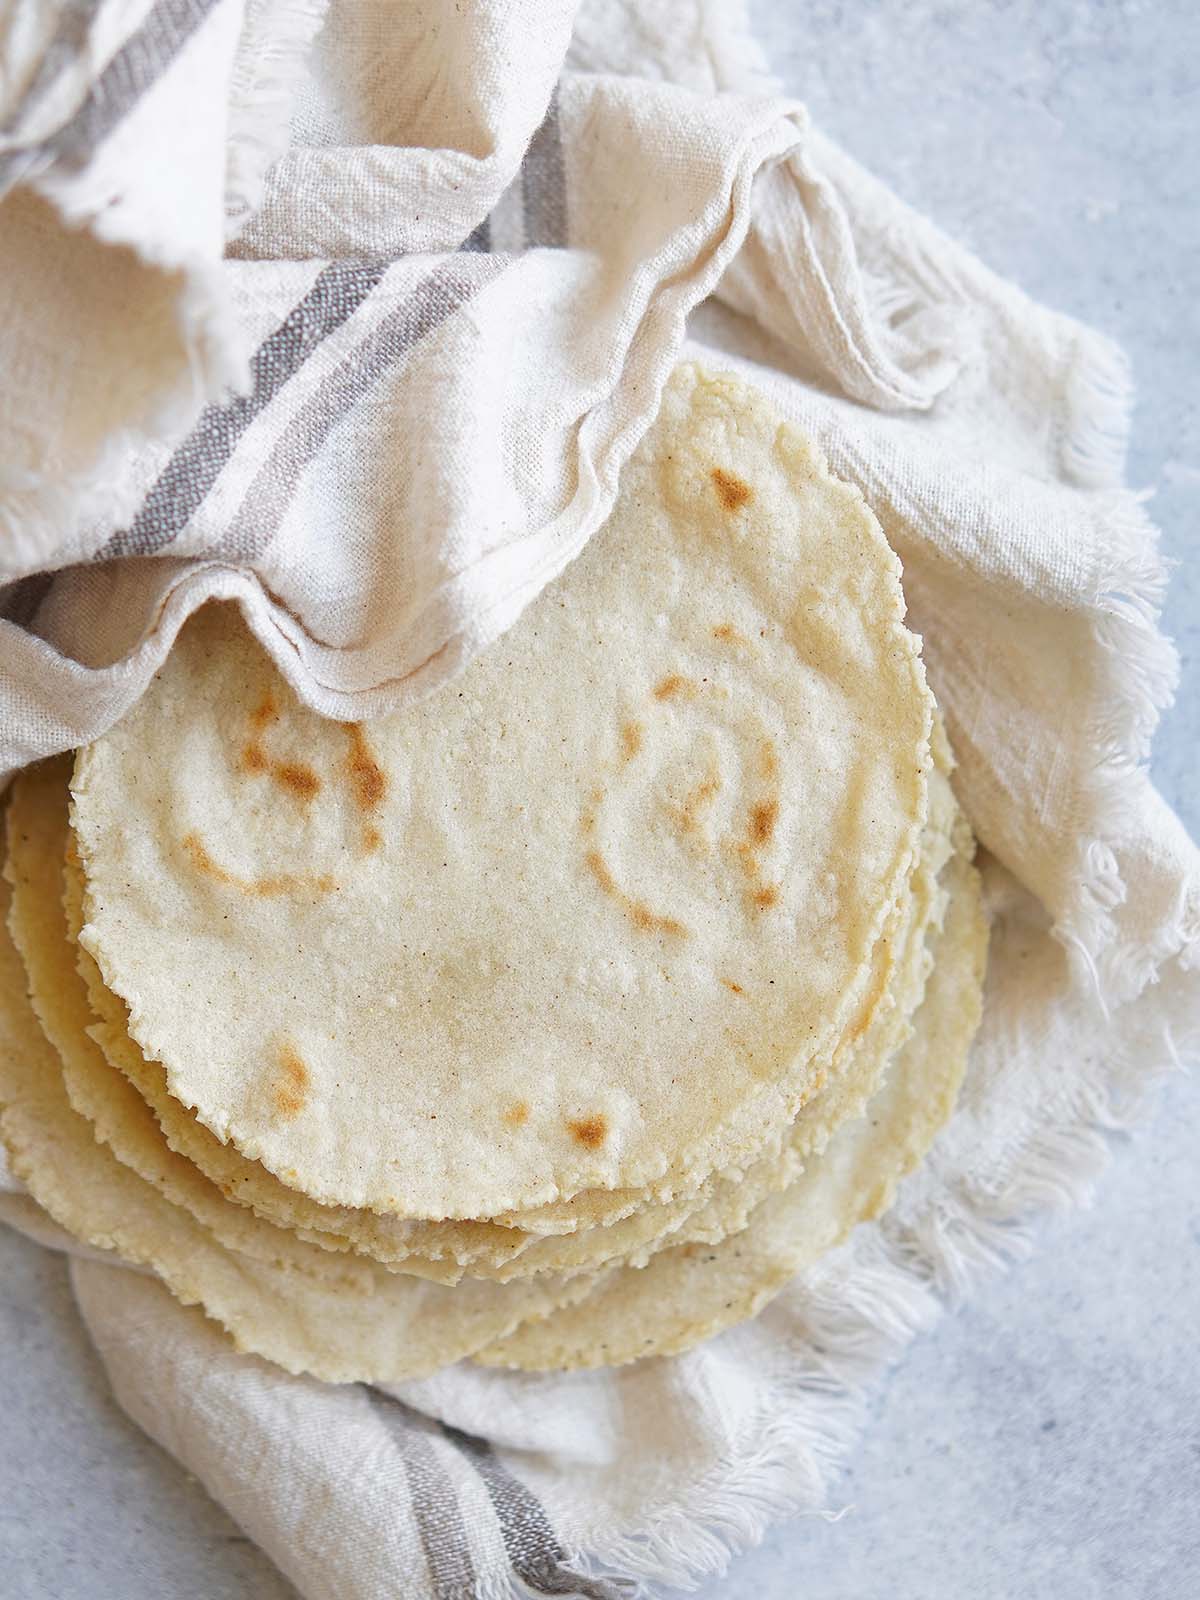 Some cooked corn tortillas inside a kitchen towel.